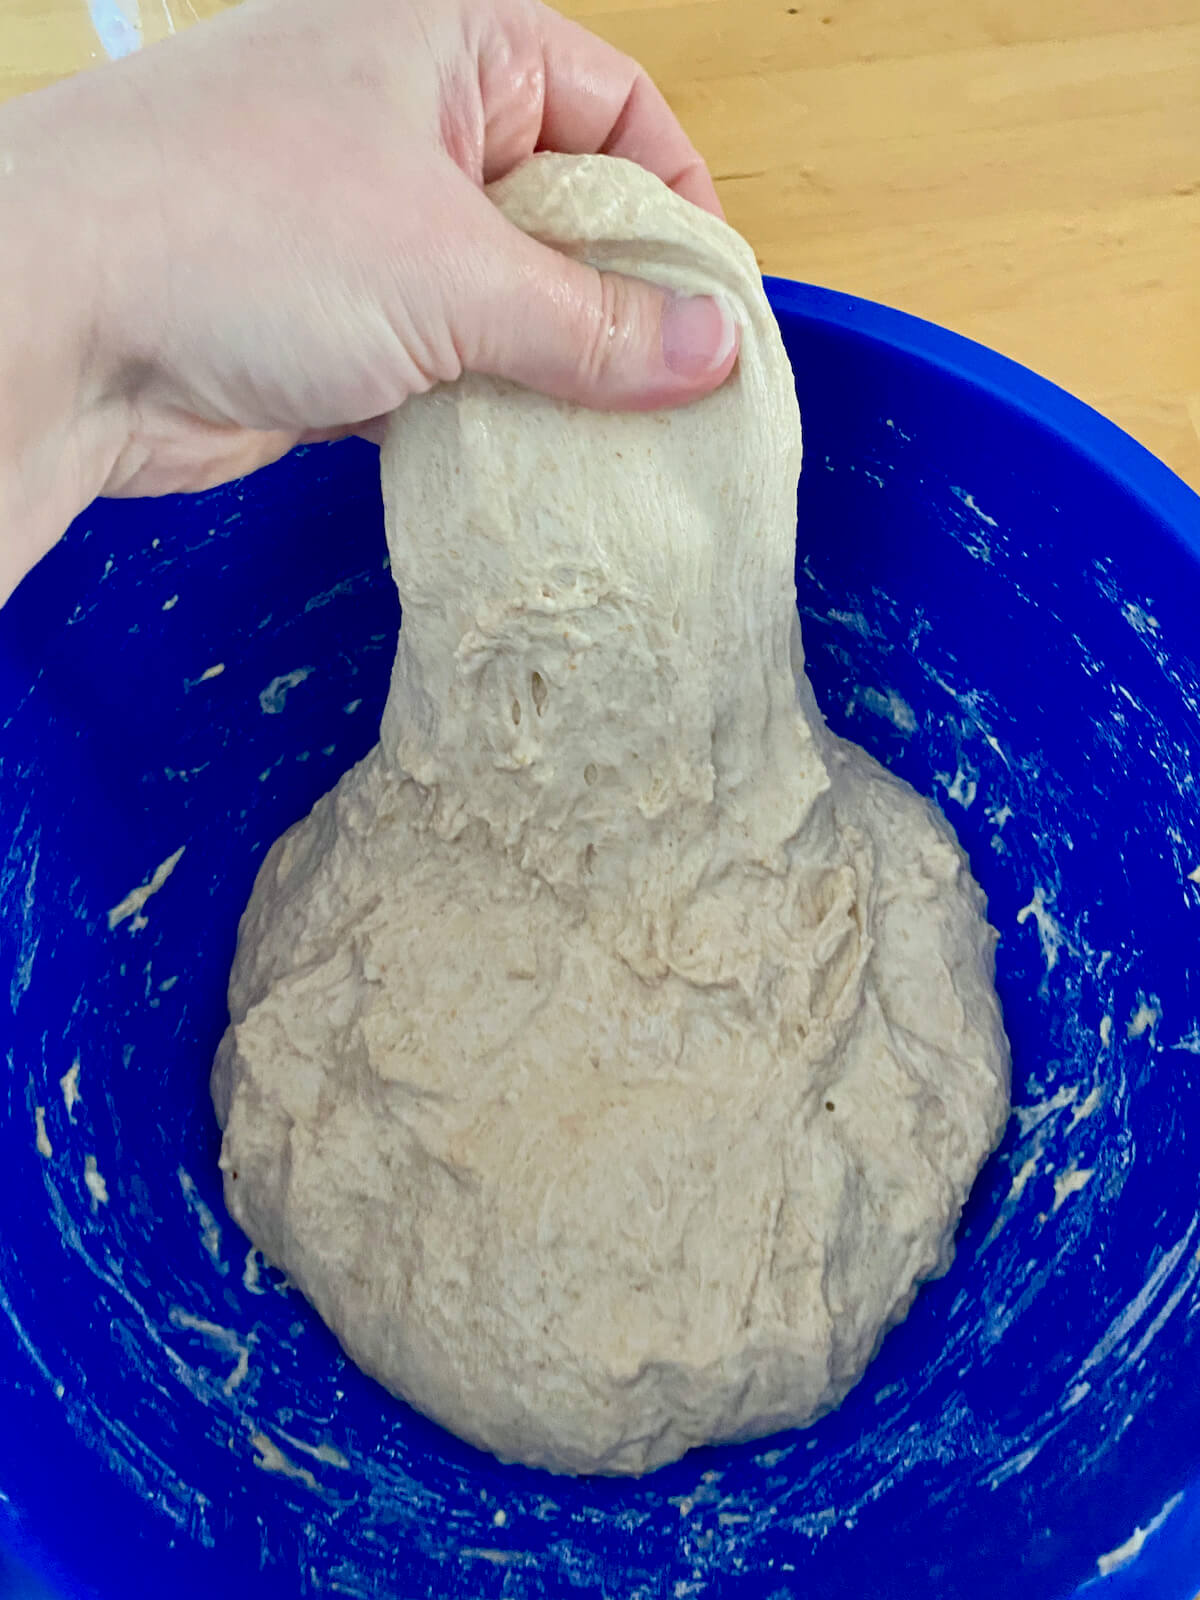 A hand lifts a corner of the dough up out of the bowl to perform a stretch and fold.